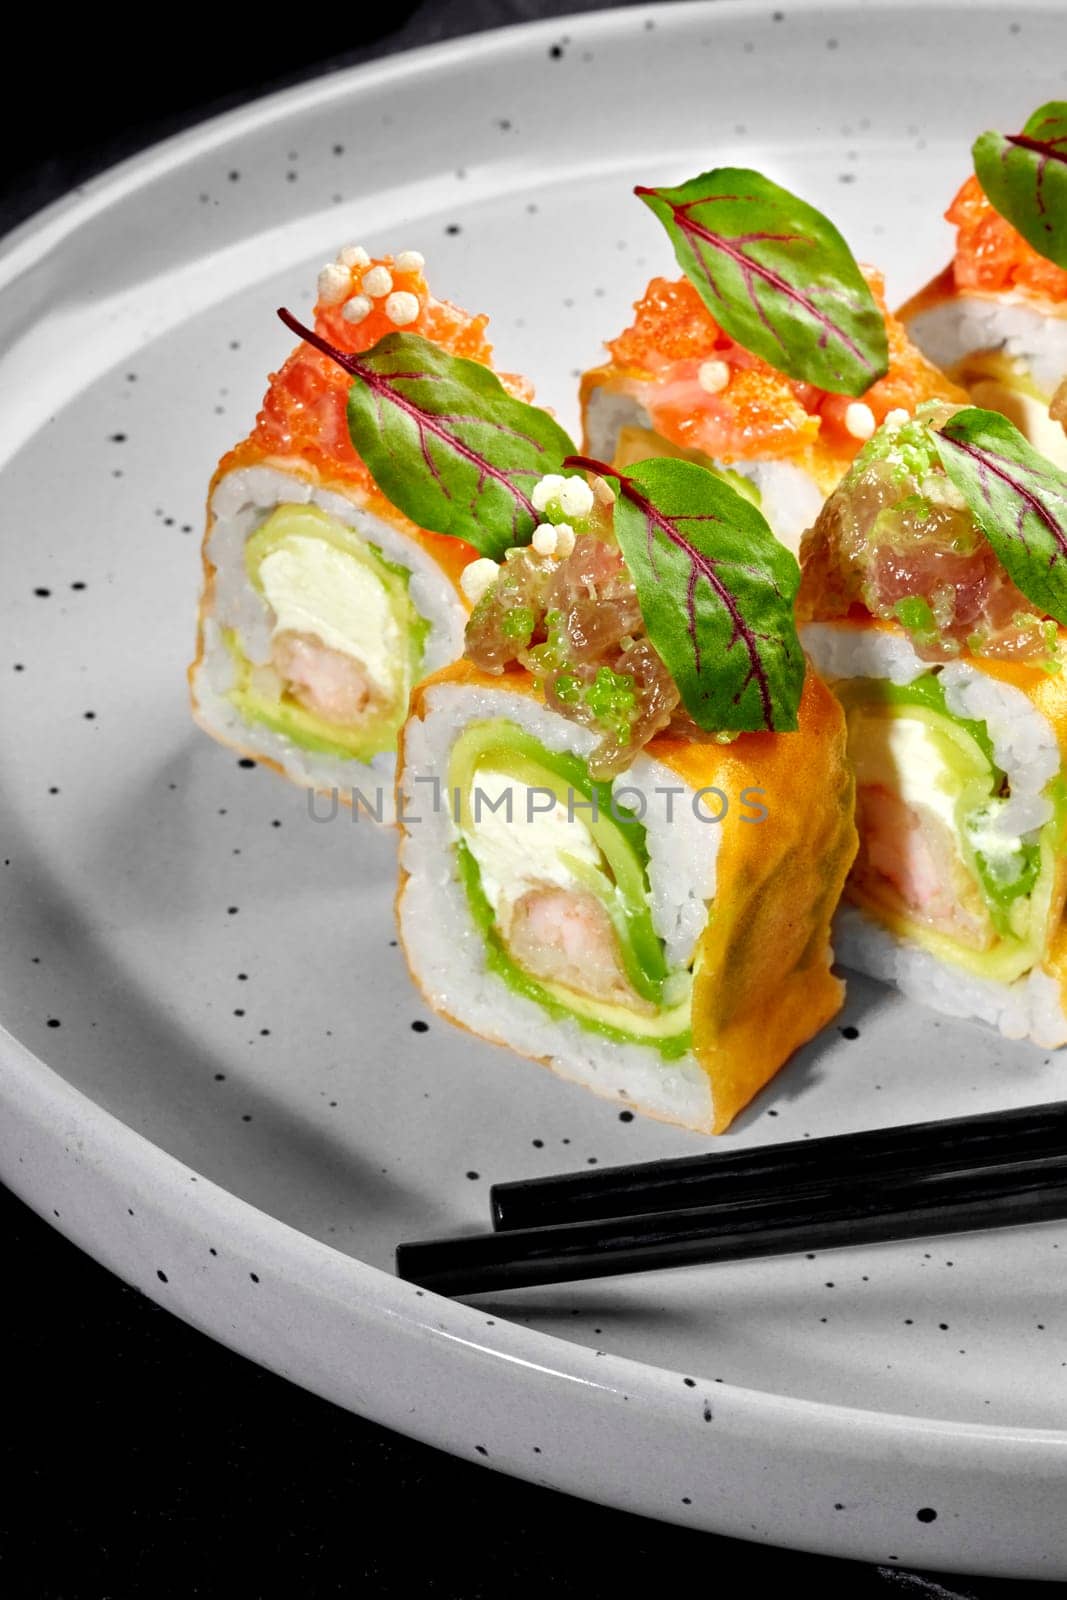 Artfully arranged colorful sushi rolls, wrapped in yellow mamenori, with shrimp tempura, cream cheese and avocado topped with salmon tartare placed on speckled ceramic plate with black chopsticks